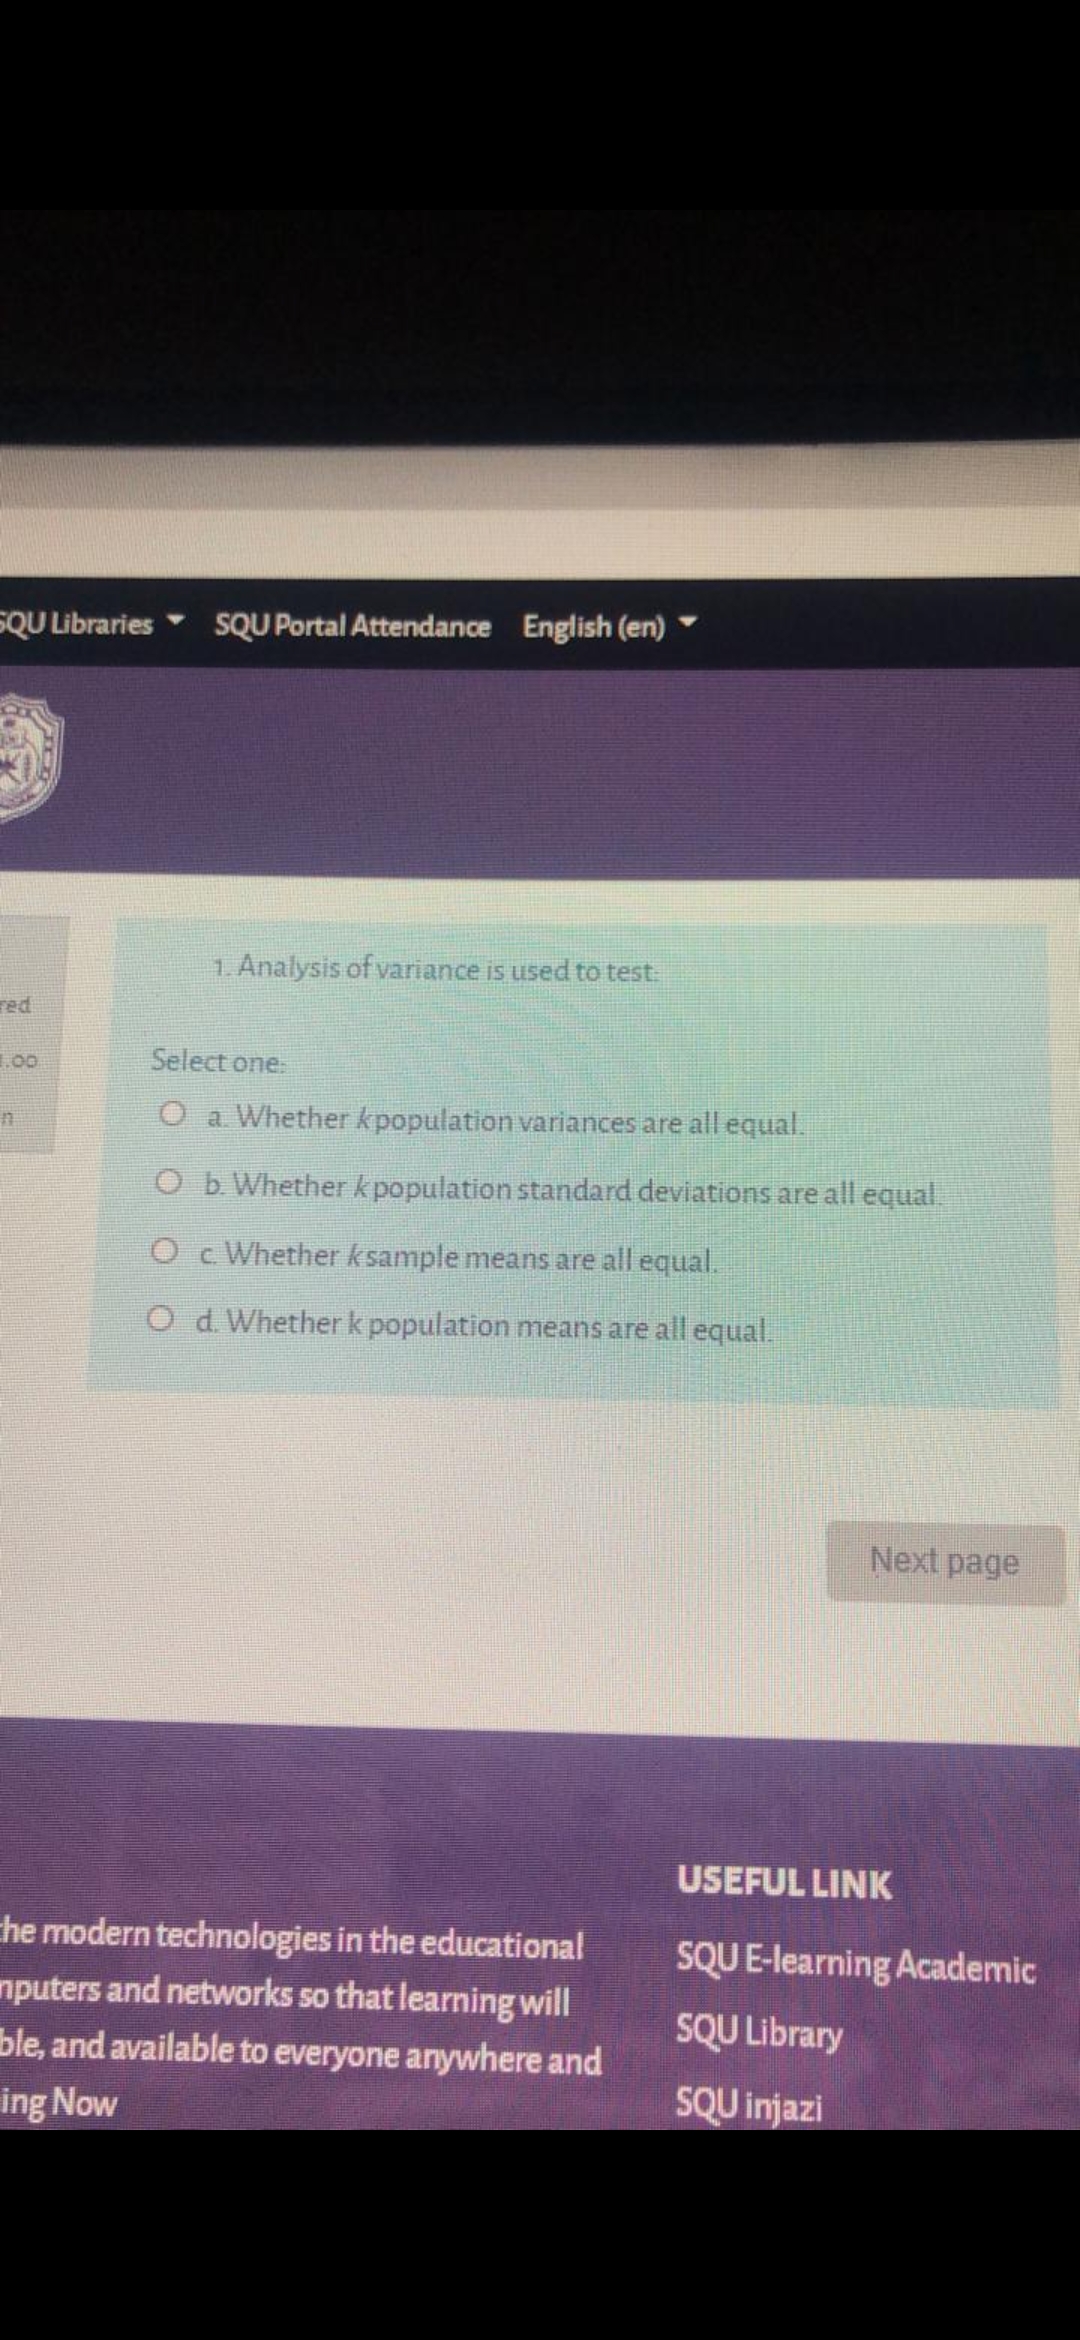 1. Analysis of variance is used to test.
Select one
O a Whether kpopulation variances are all equal.
O b Whether k population standard deviations are all equal.
O c Whether ksample means are all equal.
O d. Whether k population means are all equal.
